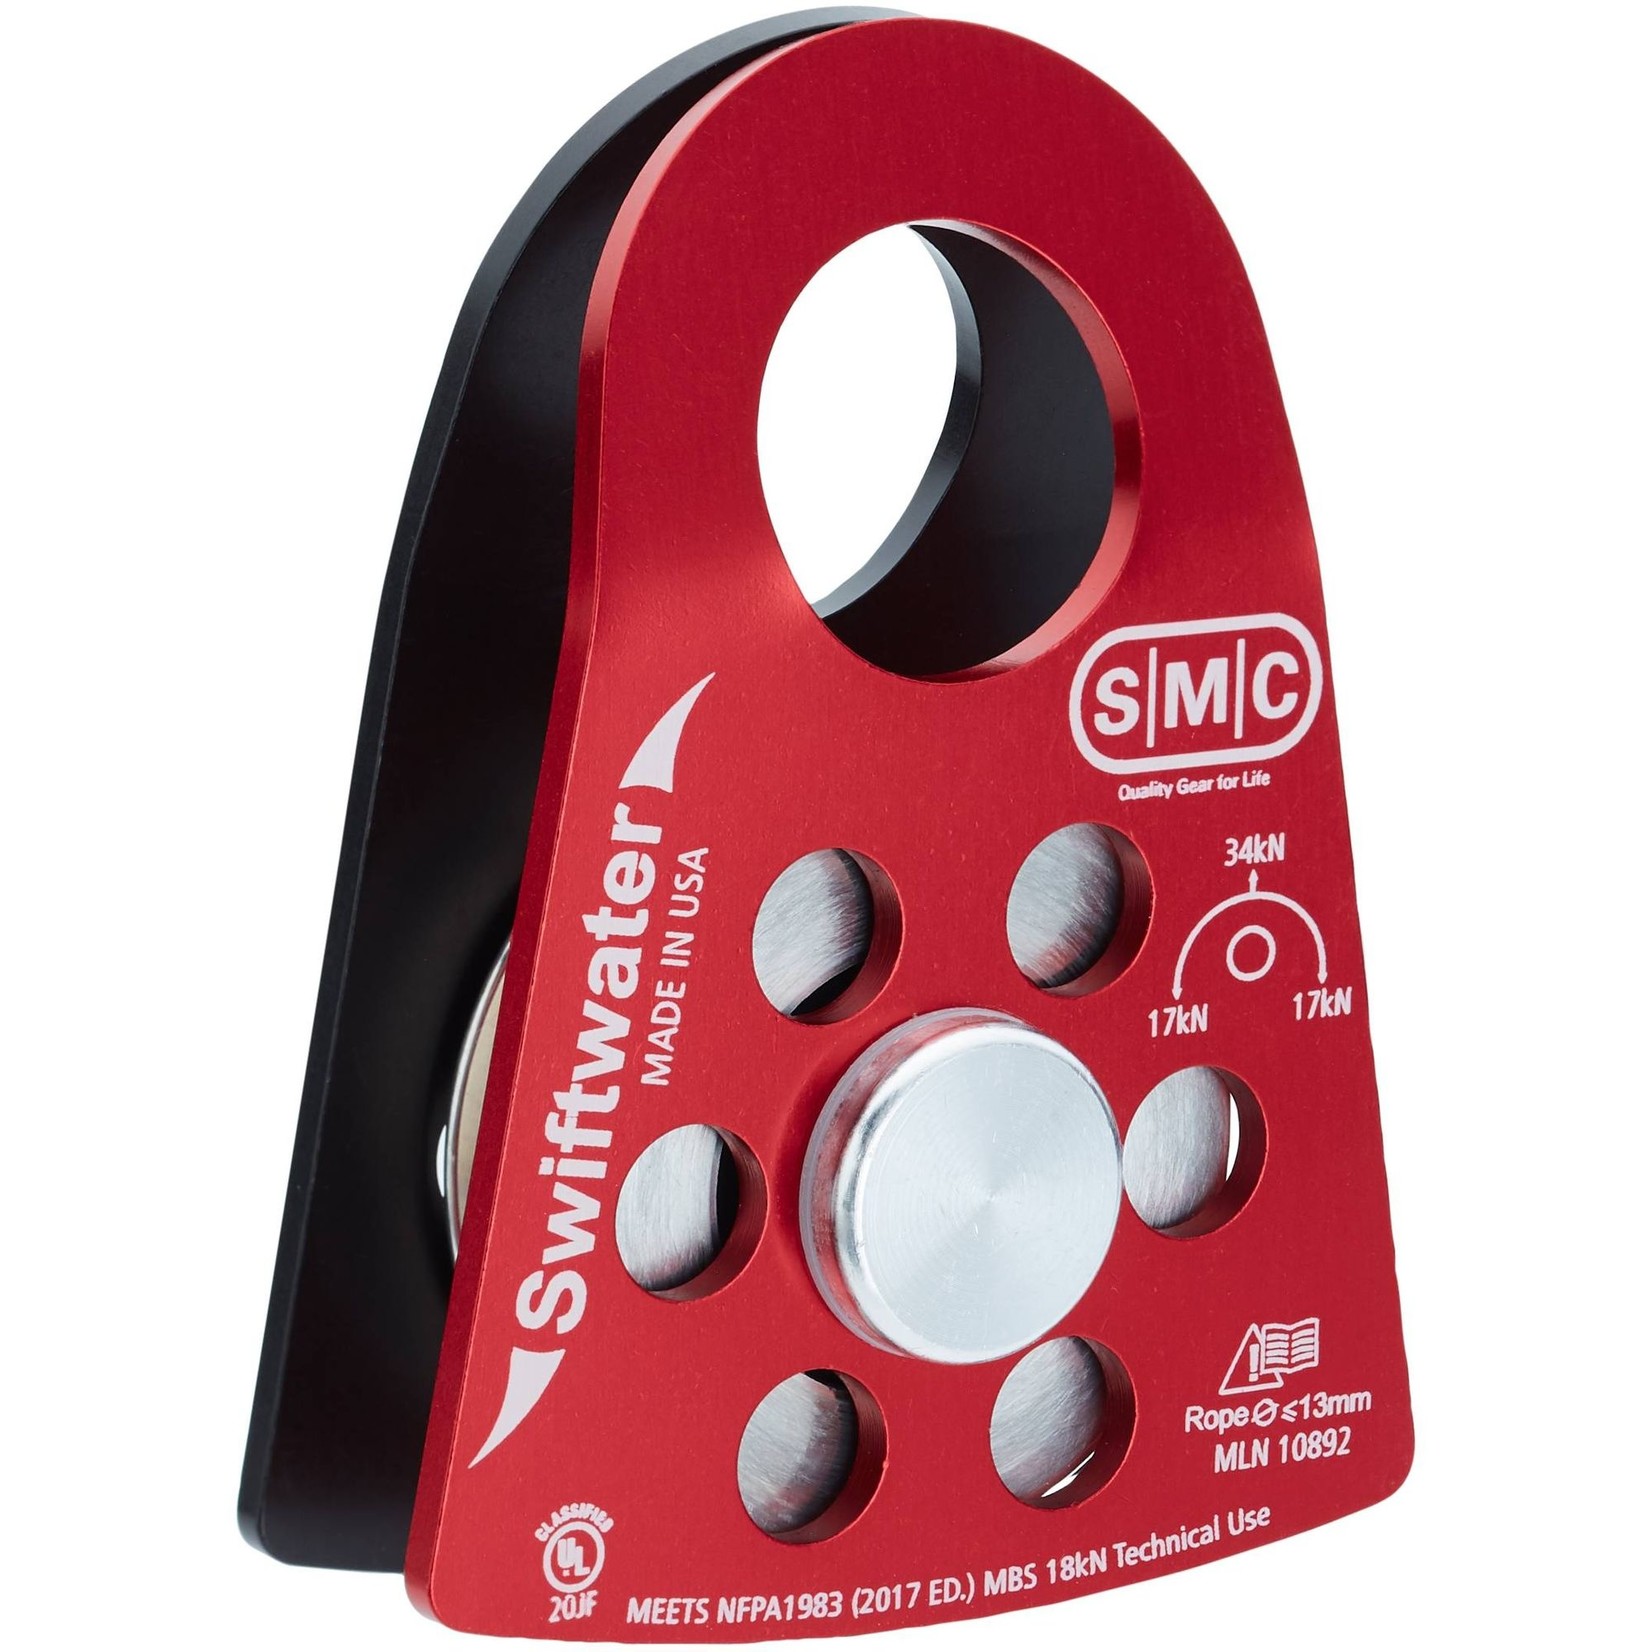 SMC SMC 2" Swiftwater Pulley